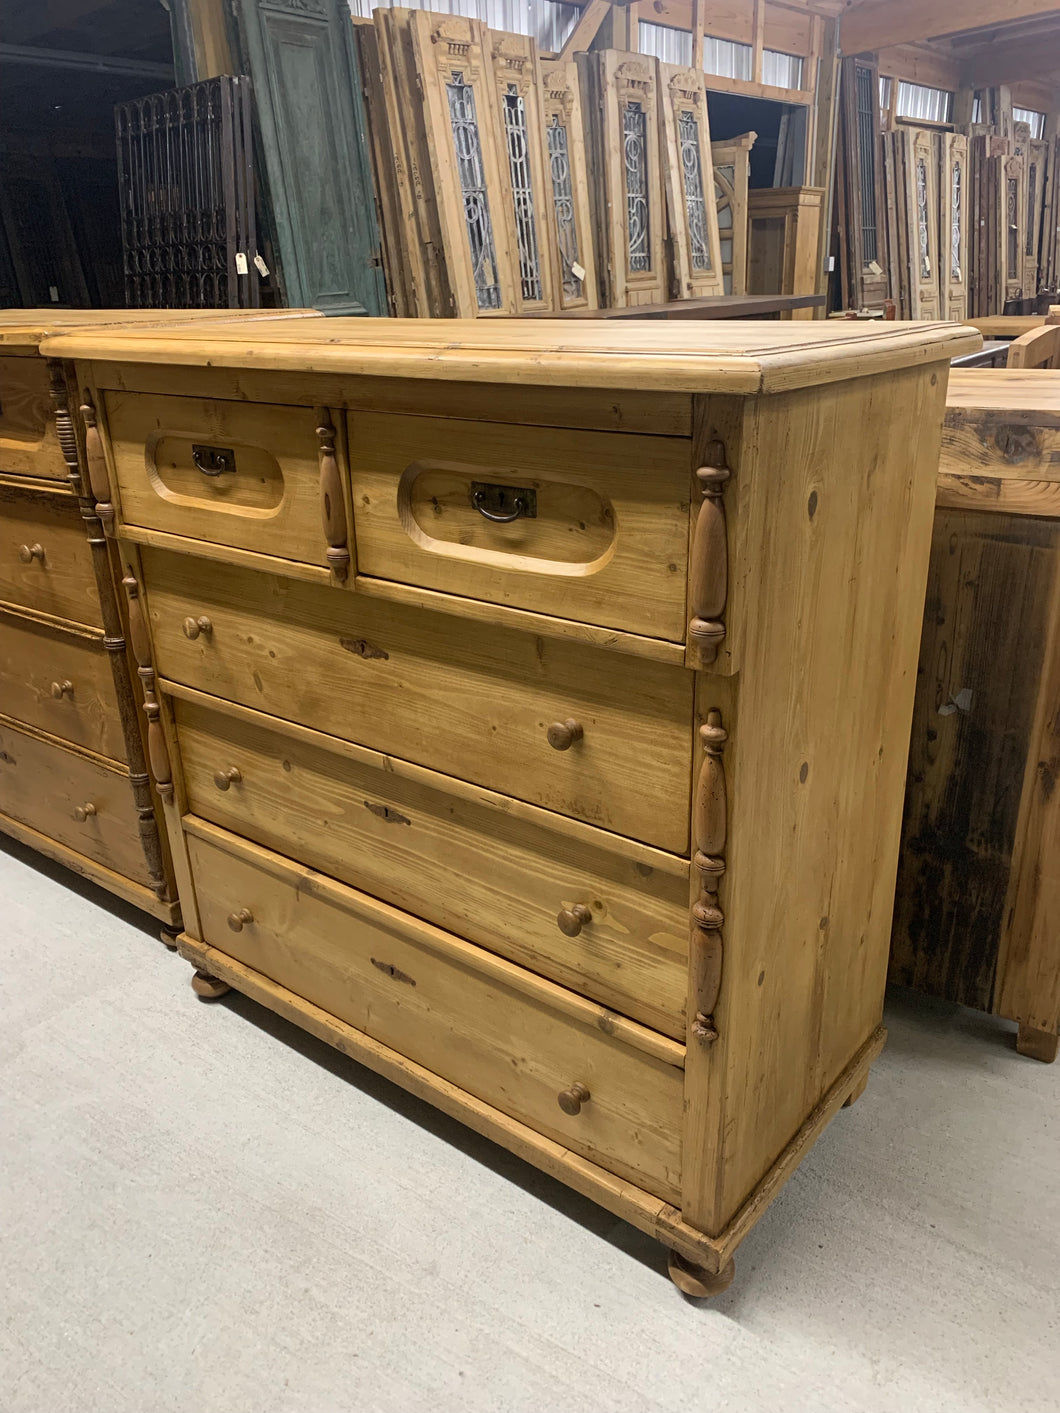 Pine chest of Drawers